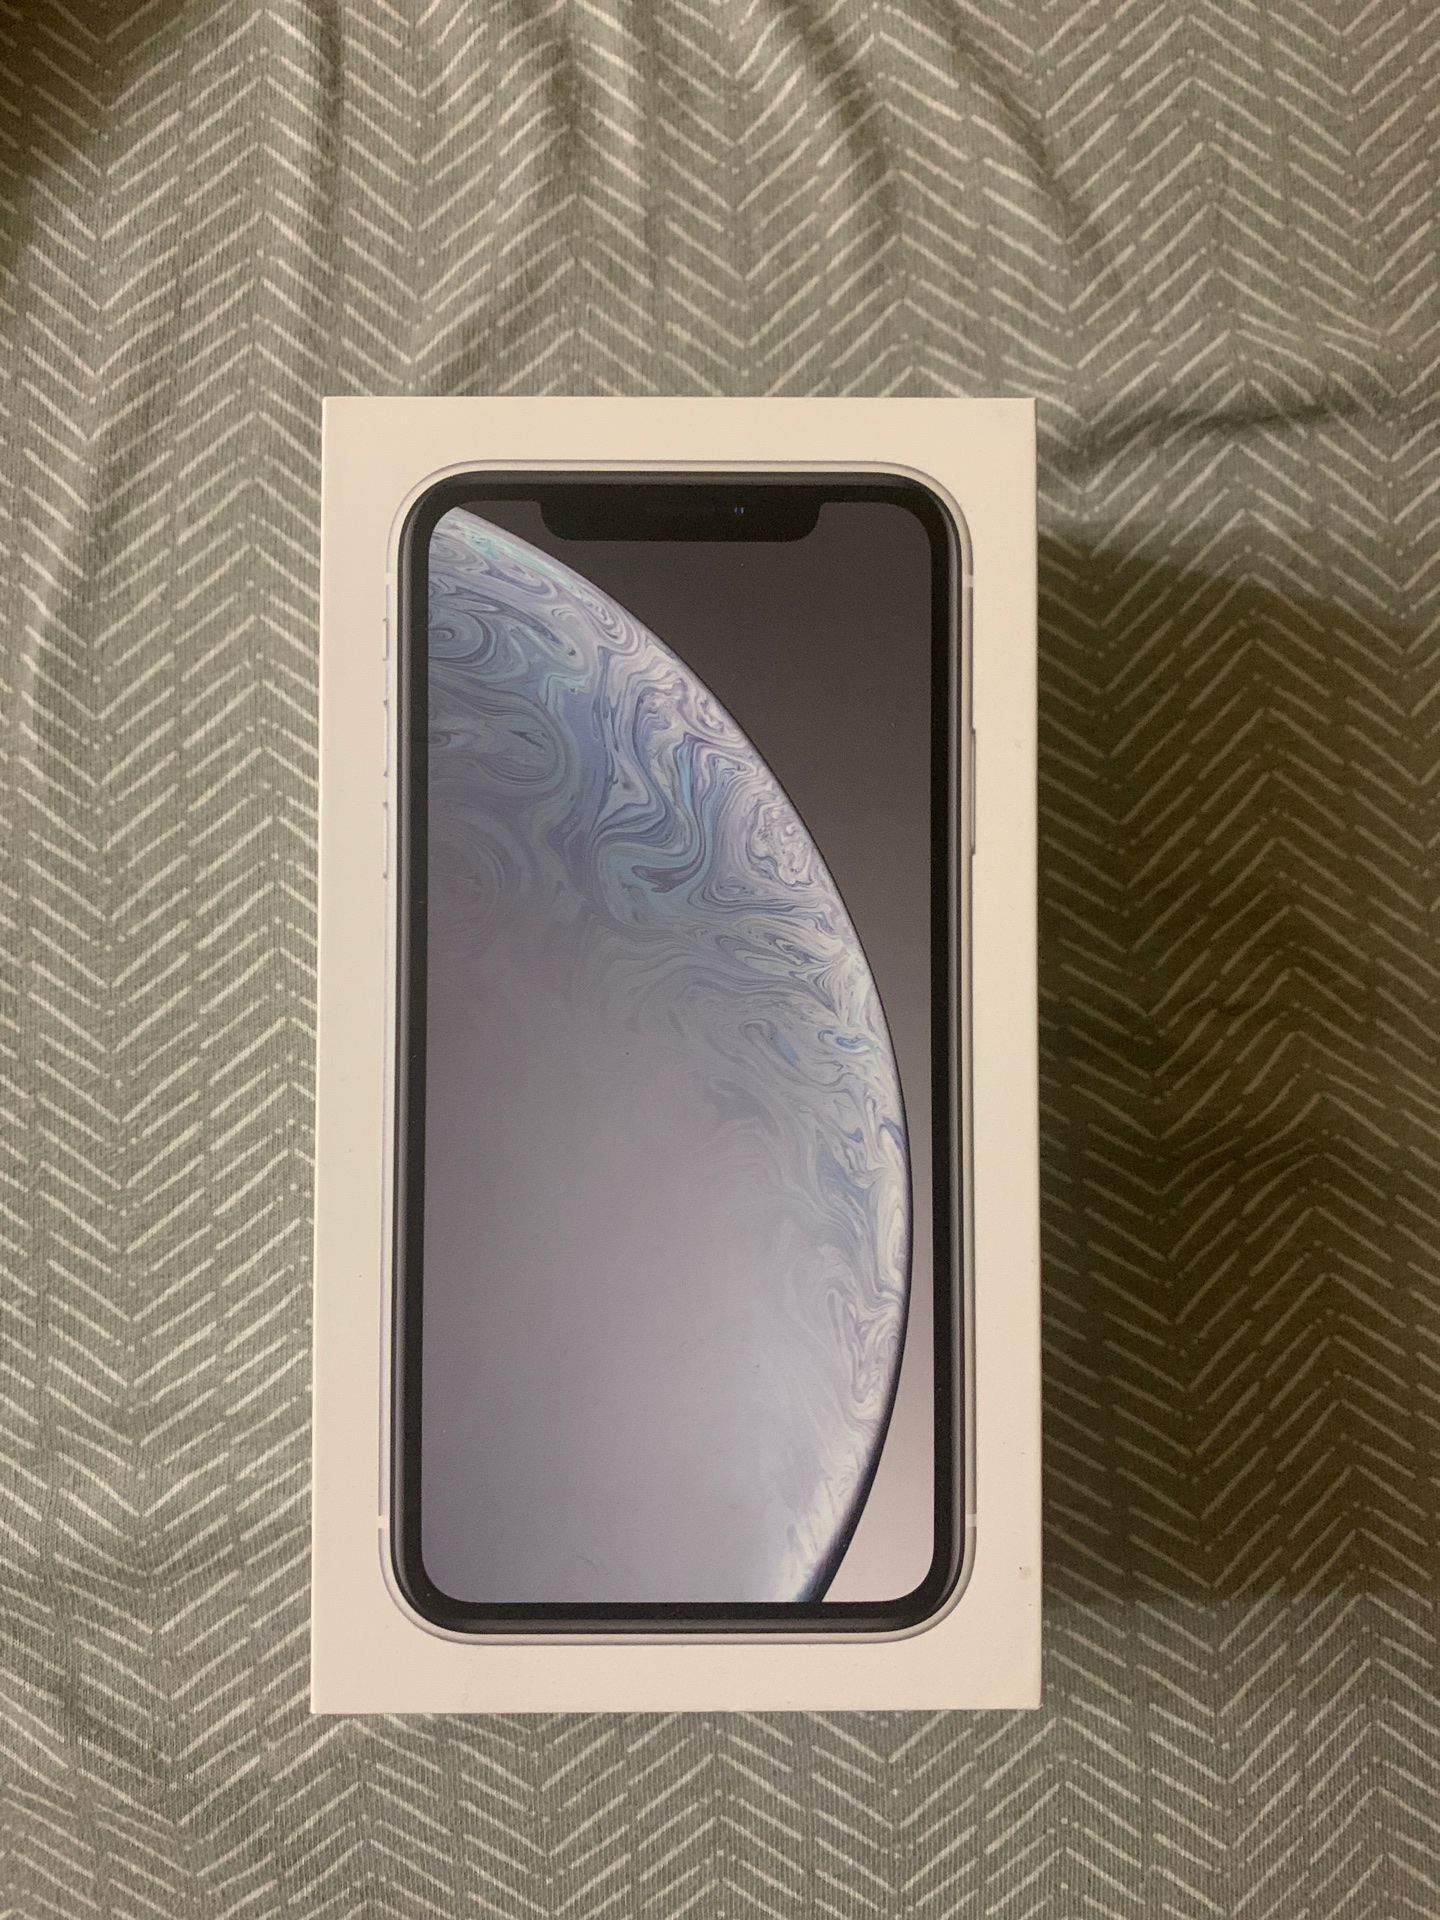 Iphone xr 64gb like new used for 2 weeks (white)